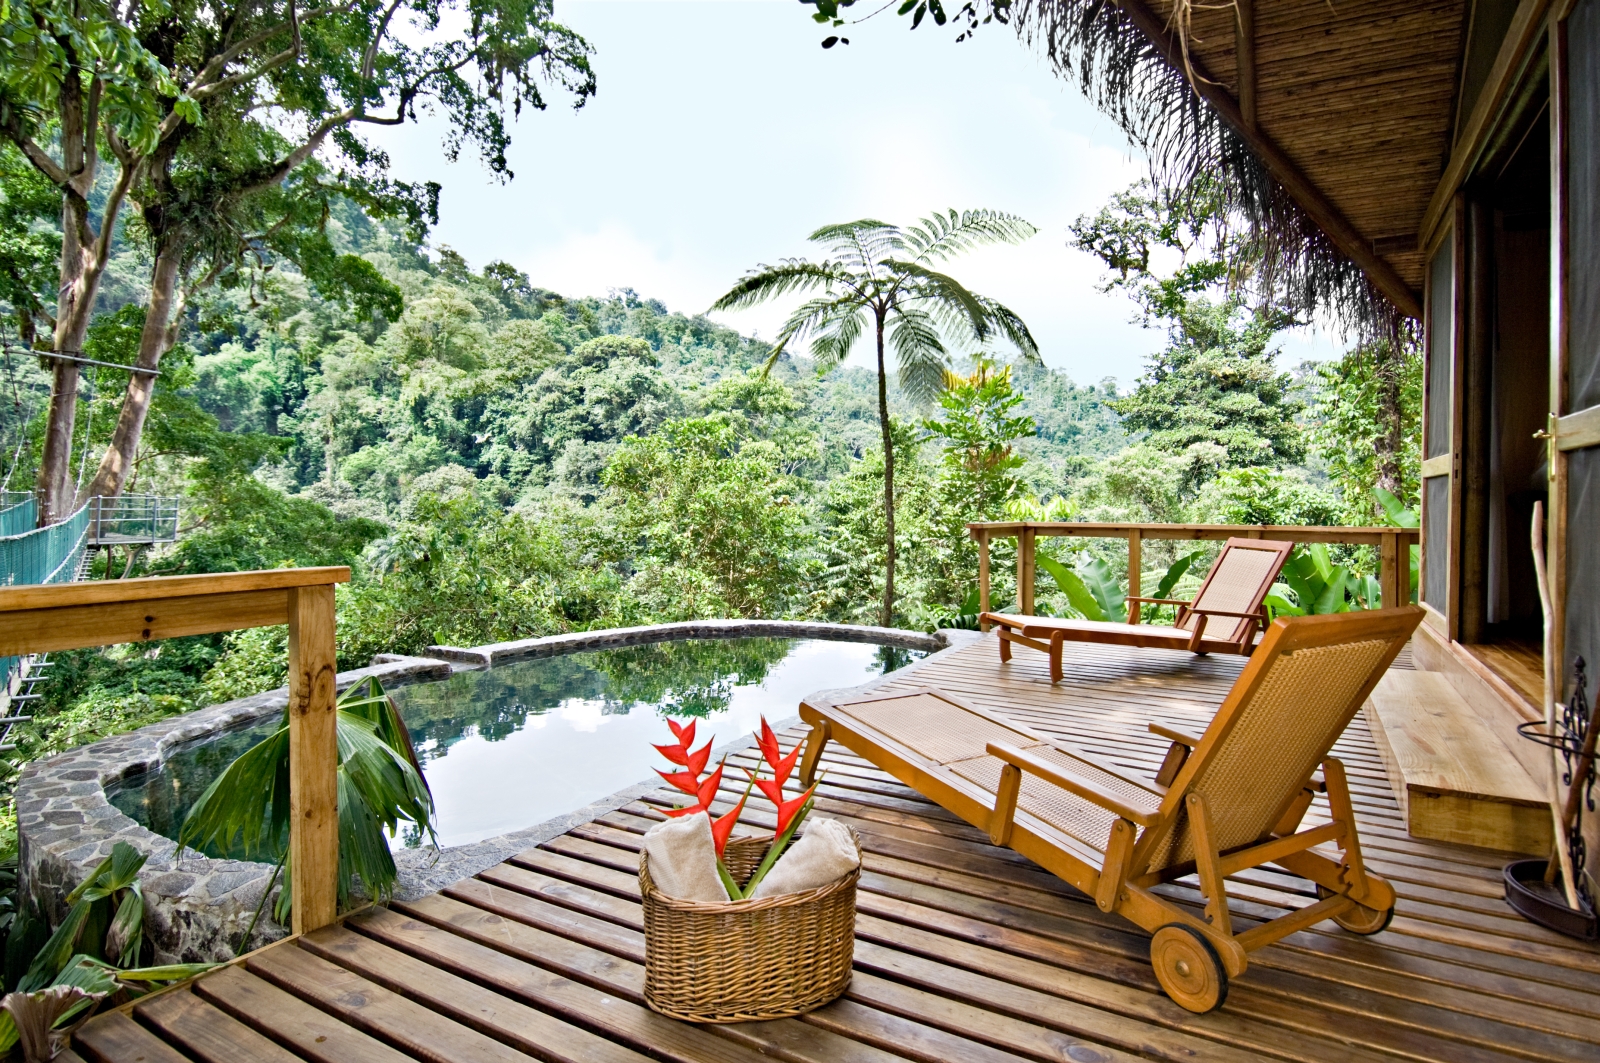 Private pool at Pacuare Lodge in Costa Rica